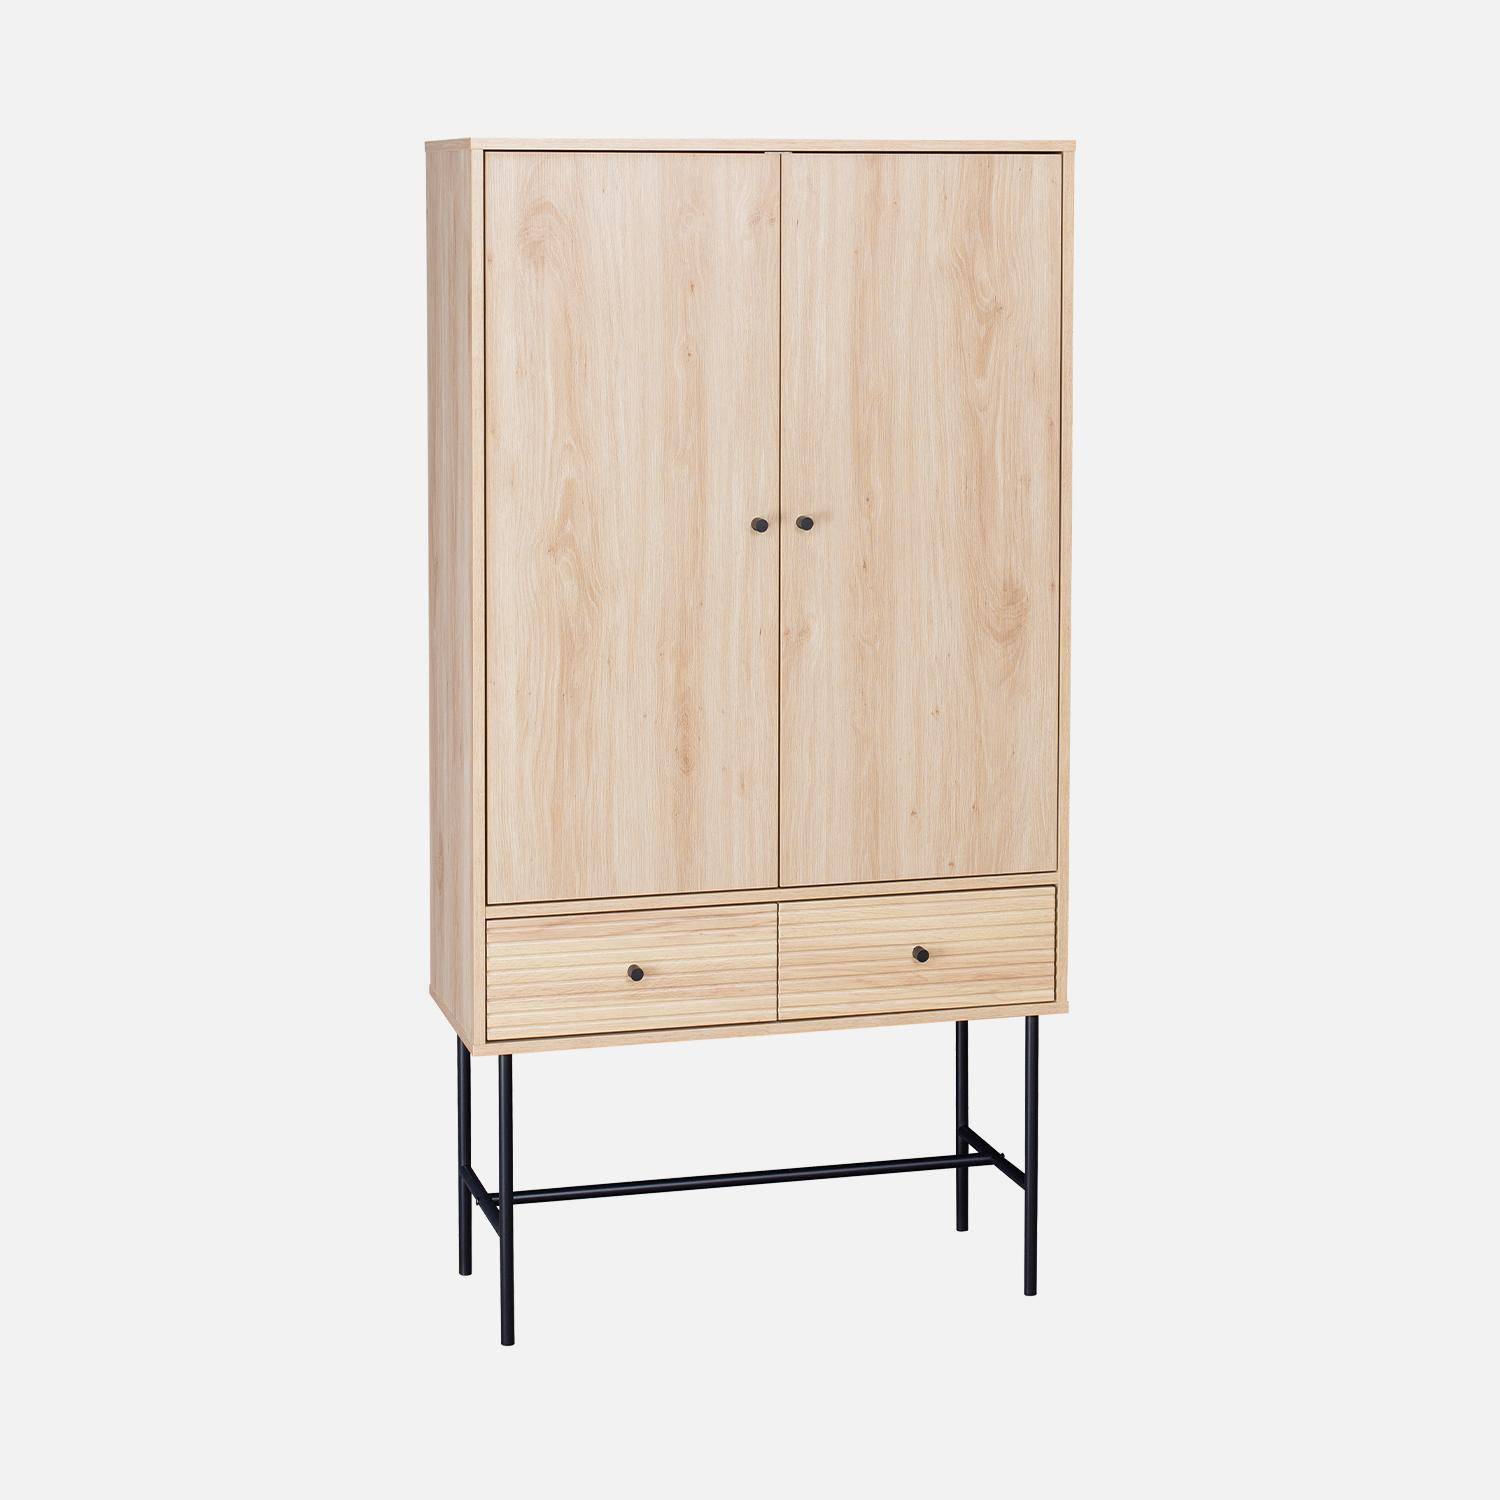 Grooved wood-effect wardrobe with 2 doors, 2 drawers and 3 shelves,sweeek,Photo5